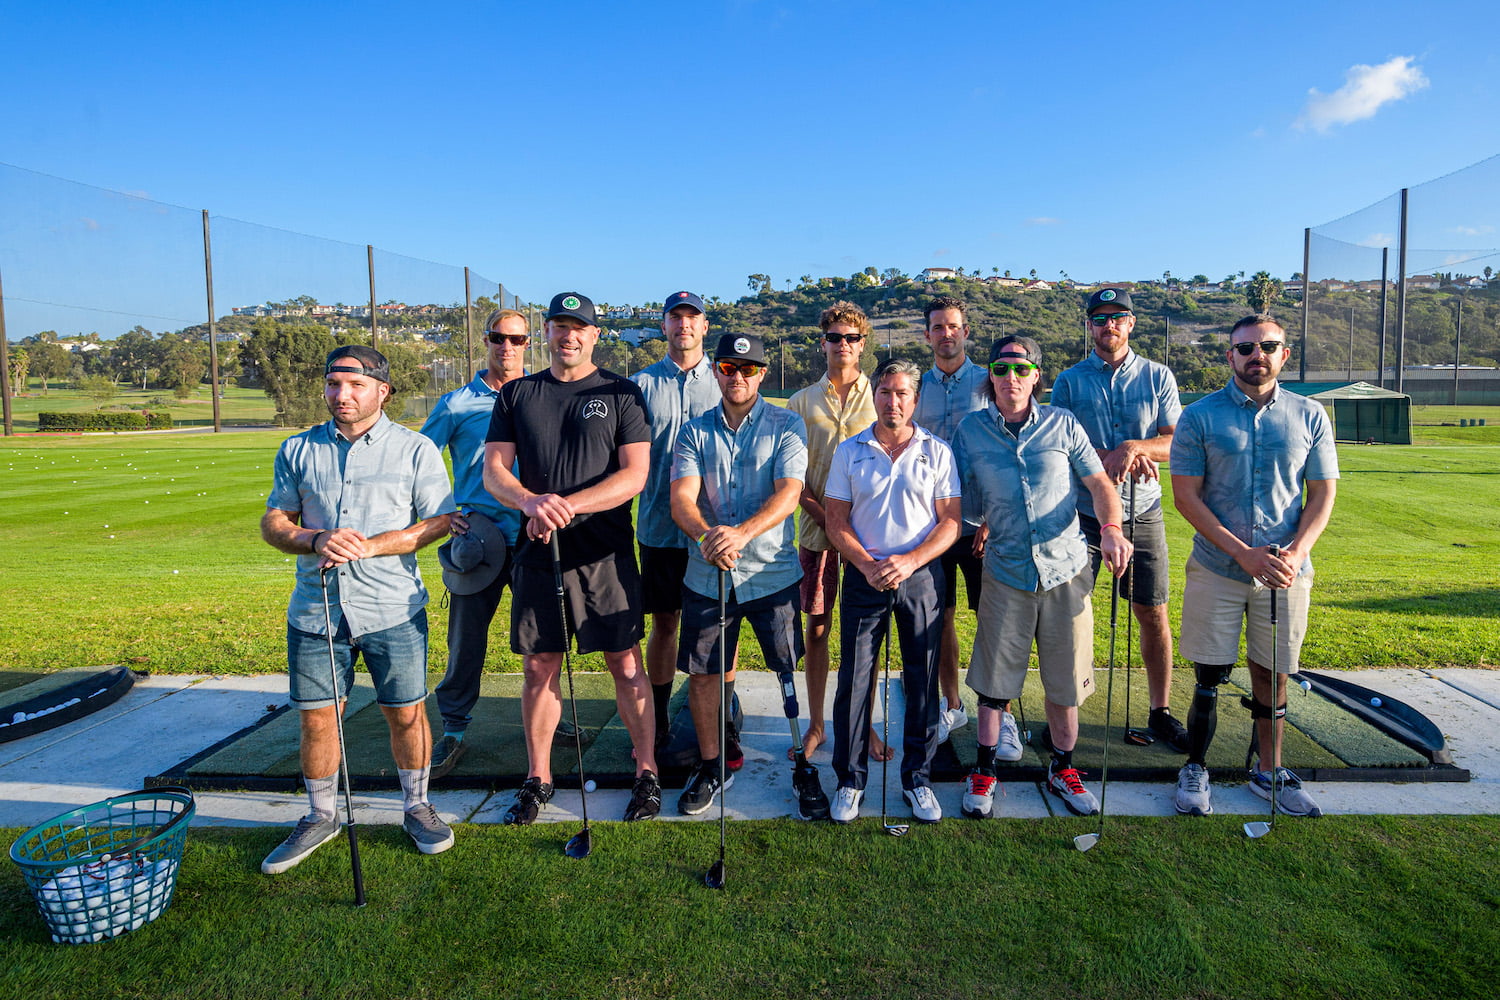 Group photo of the Forge men at the golf driving range with their golf clubs.